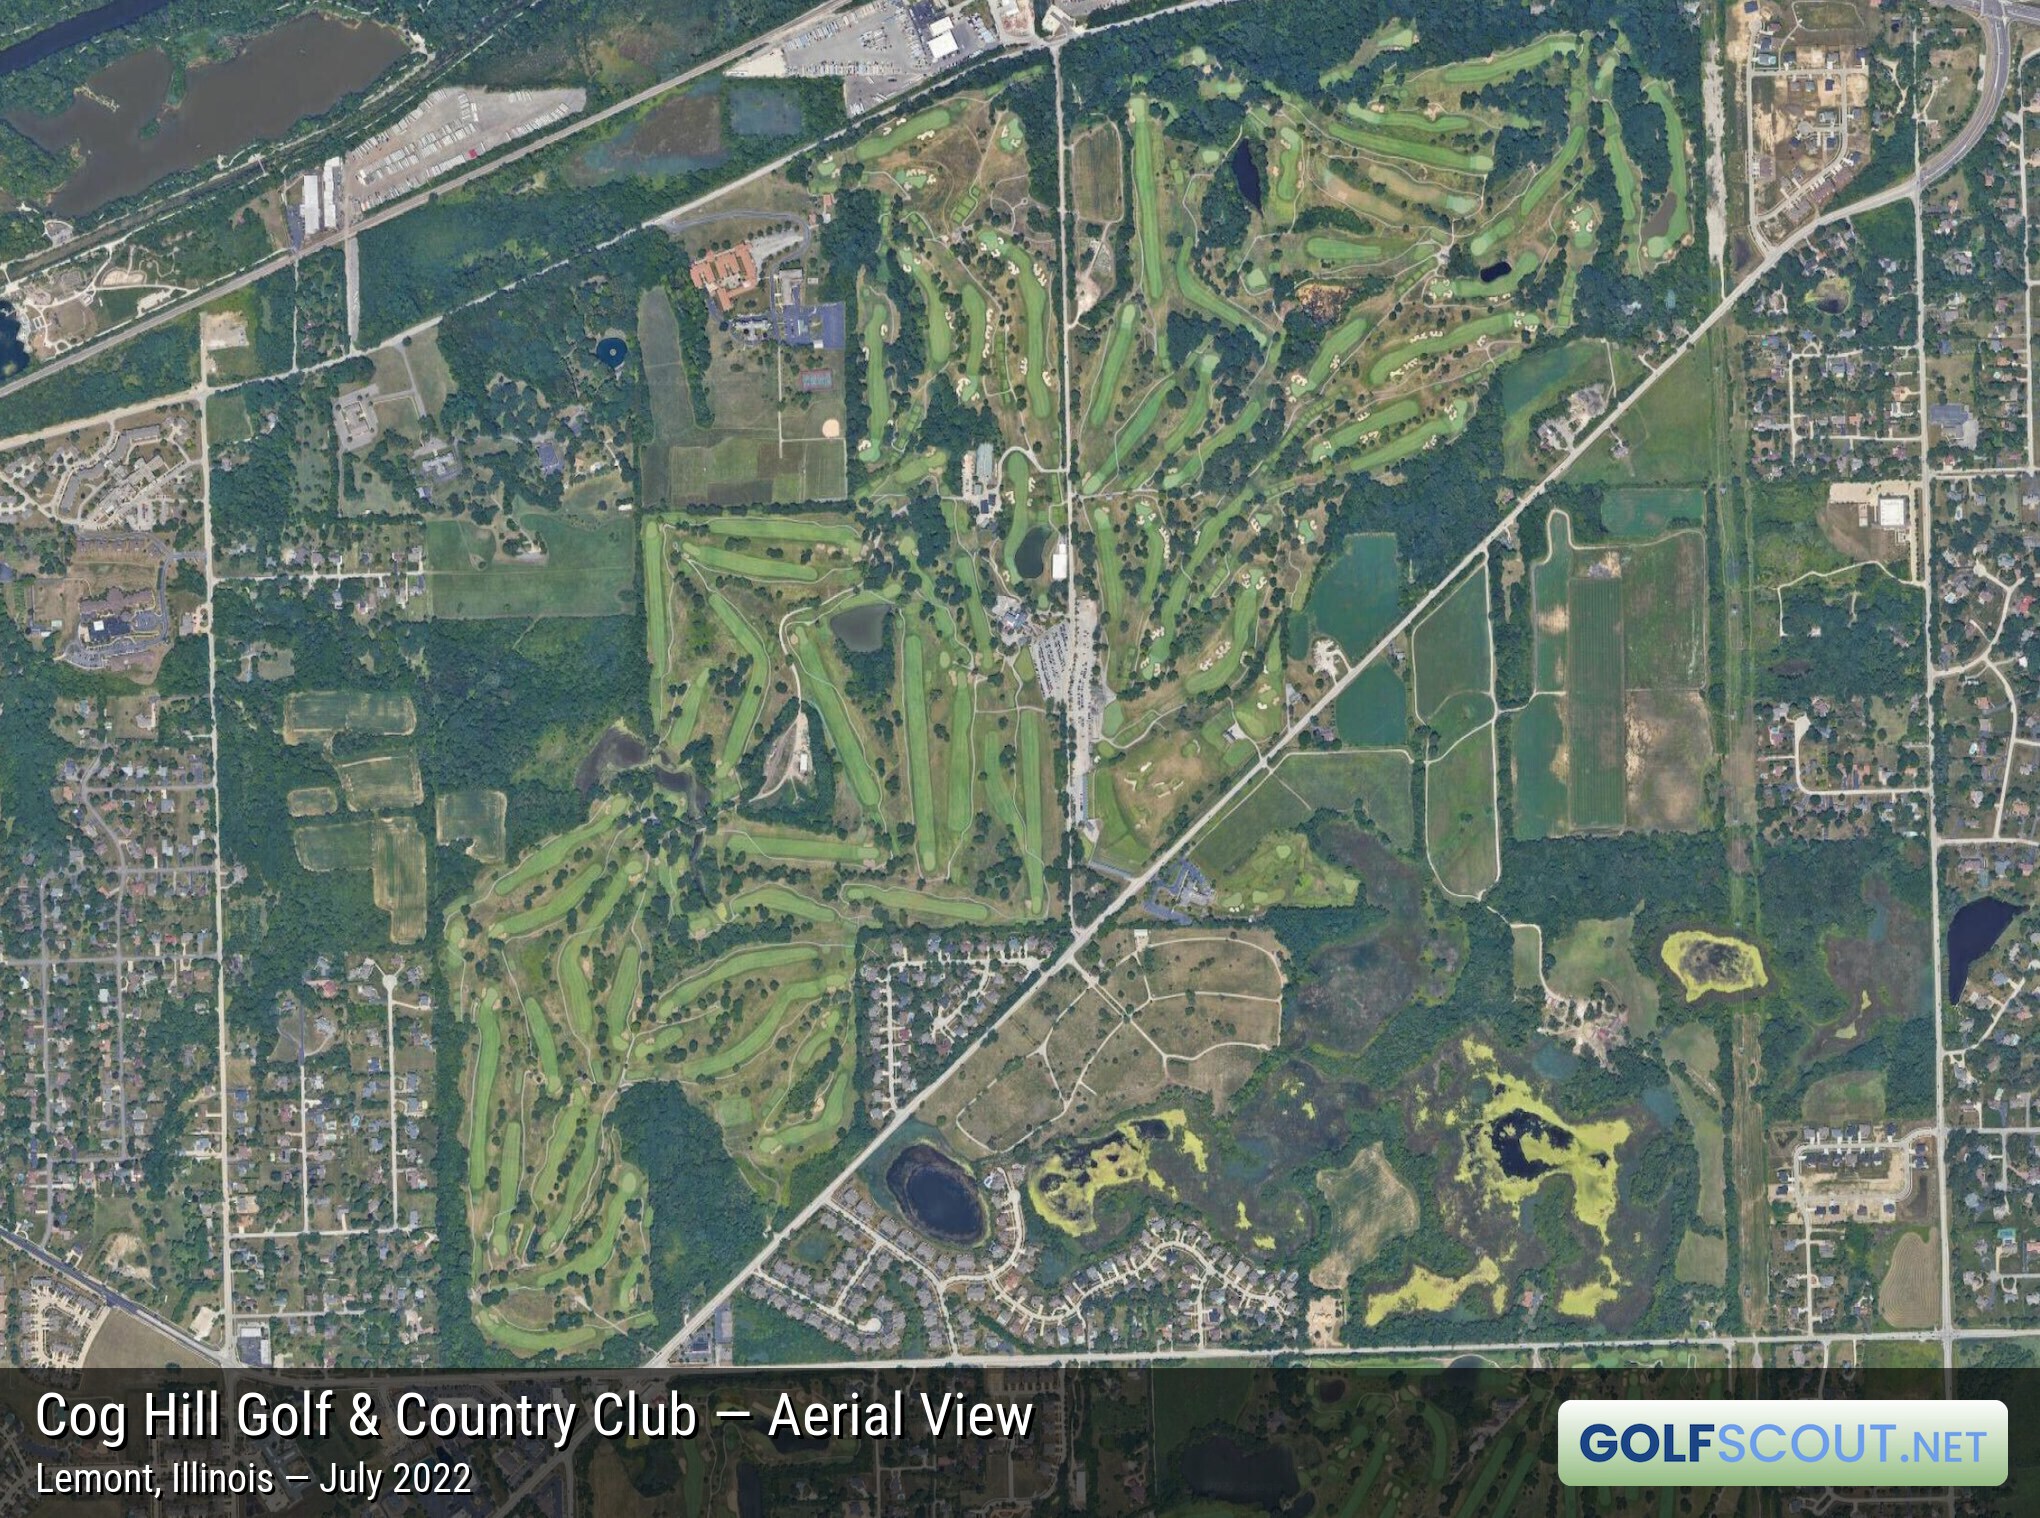 Aerial satellite imagery of Cog Hill Course #3 in Palos Park, Illinois. Cog Hill has 4 courses. Course 1 and 3 intertwine in the southwest portion of the property. Image courtesy of Google Maps.